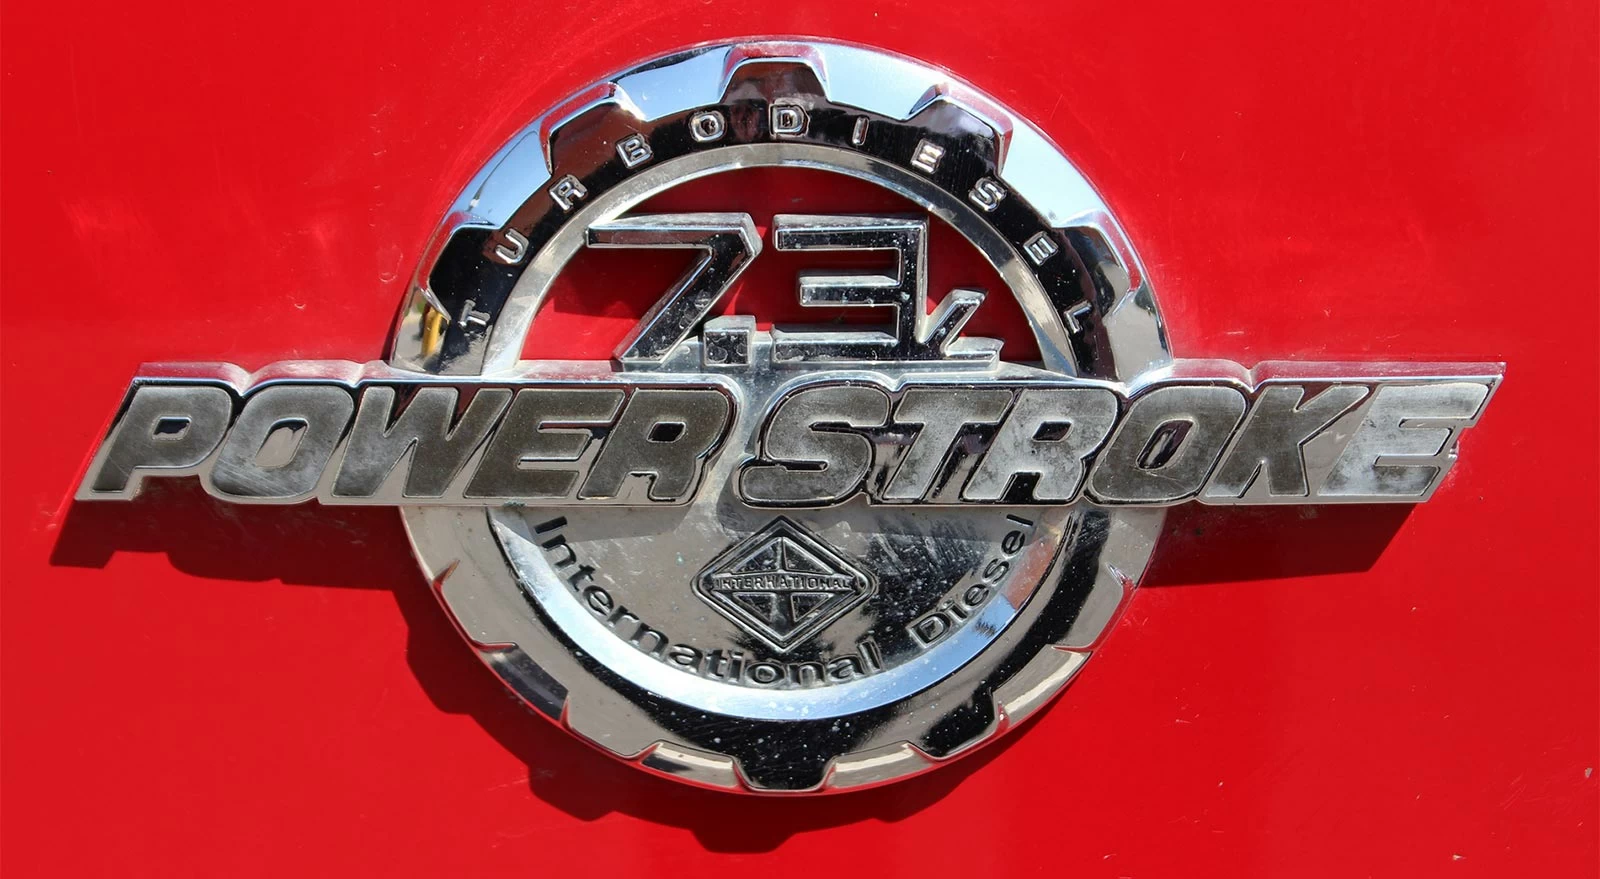 A History of the Ford Powerstroke Diesel Engine